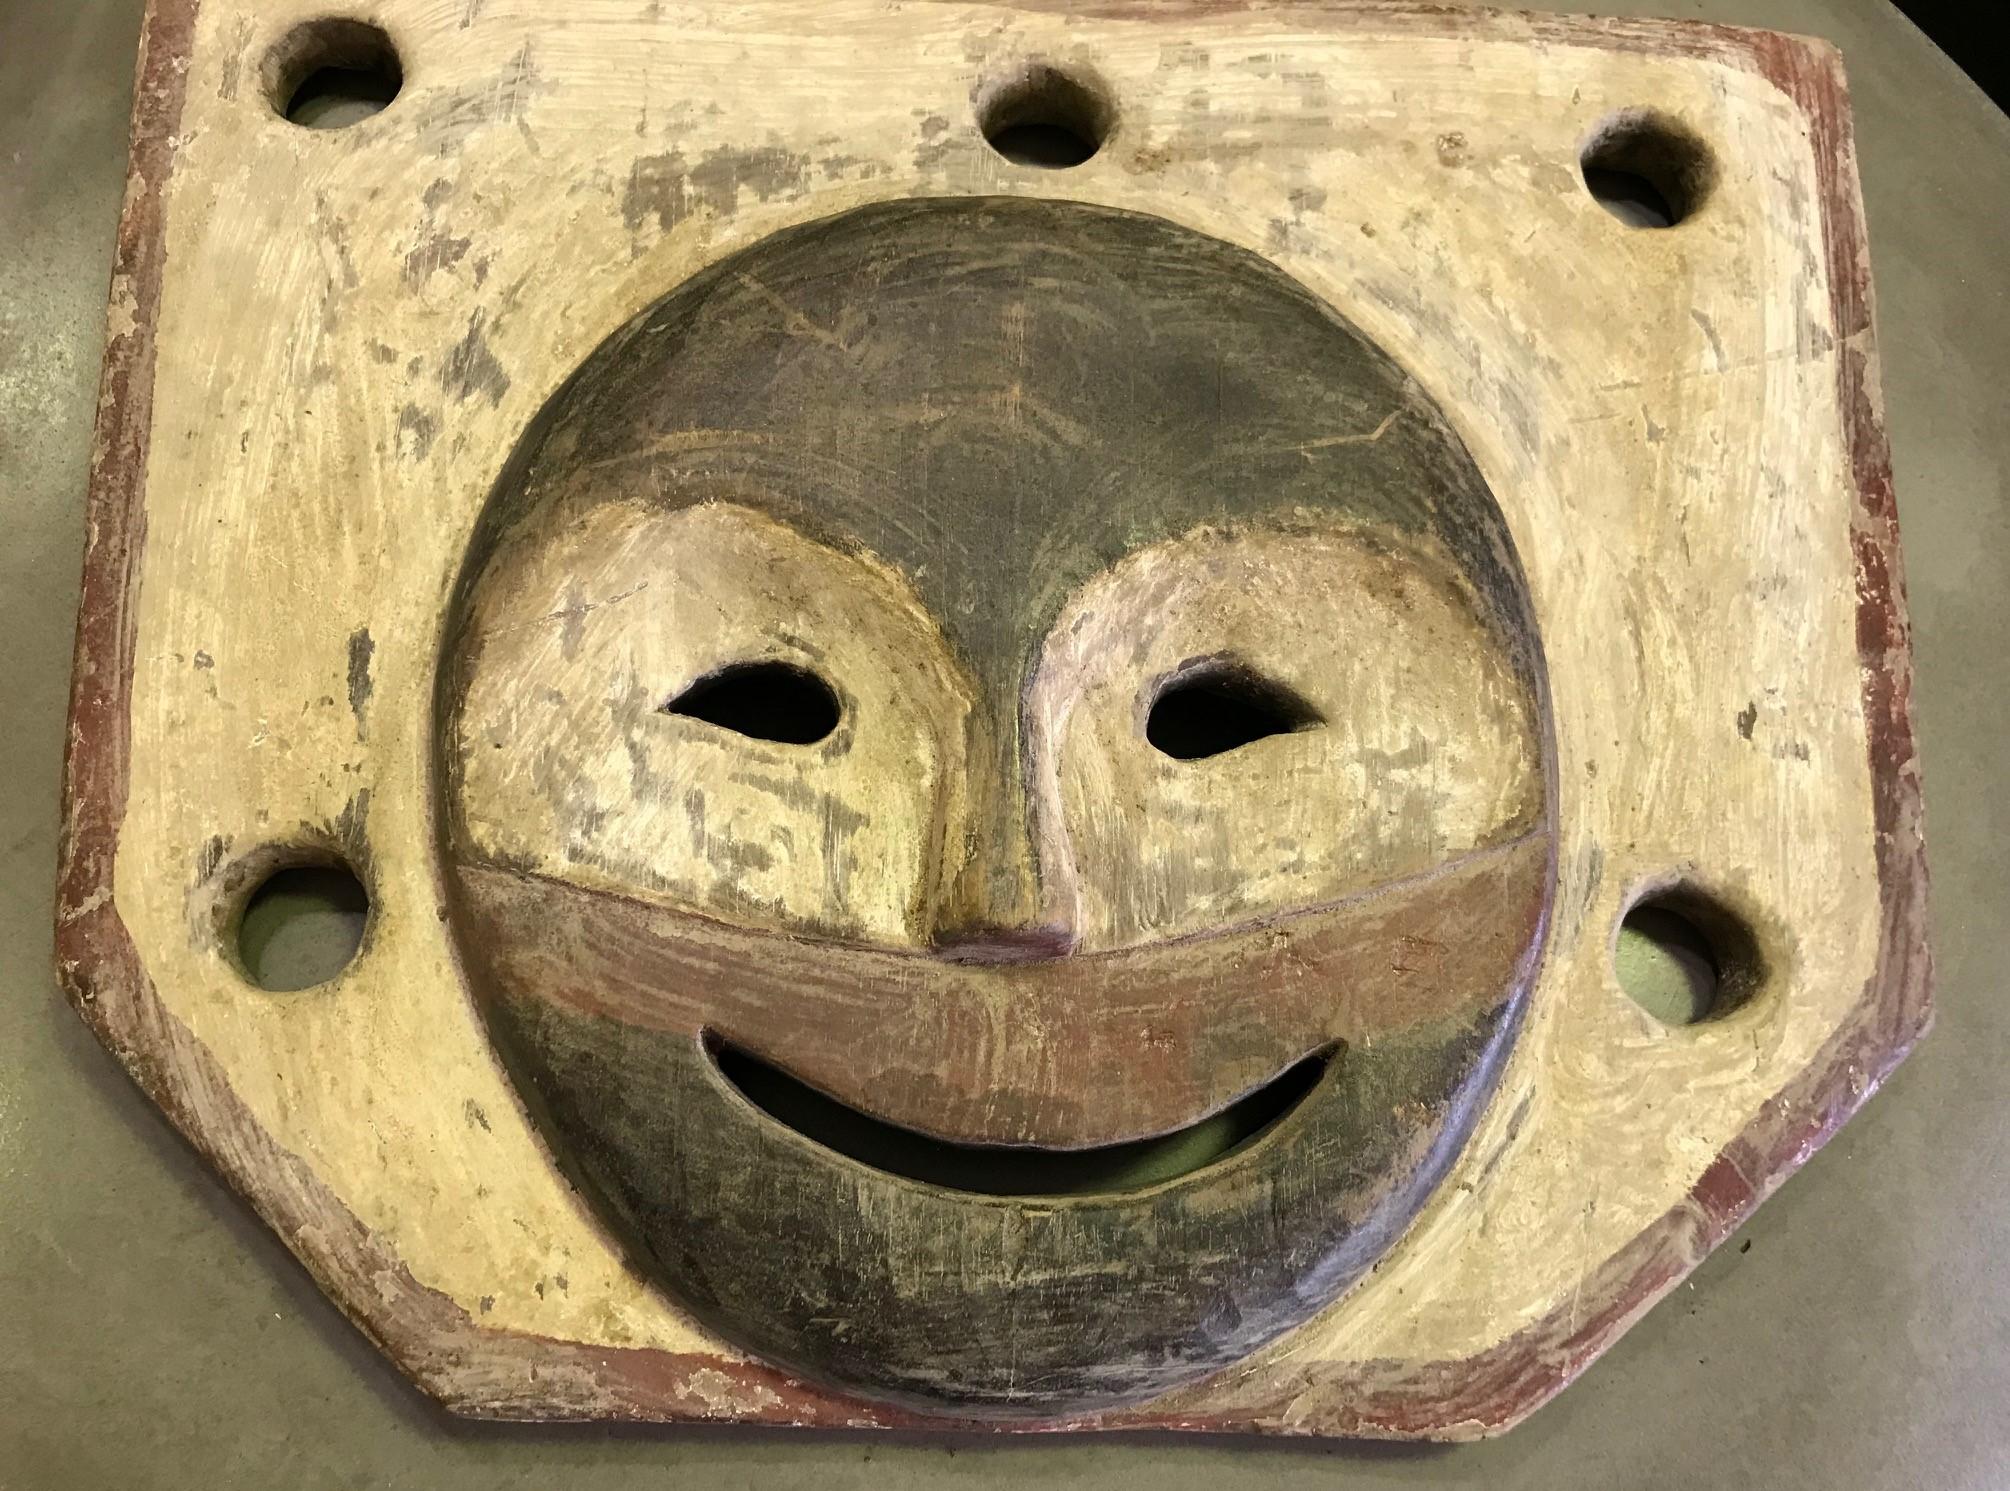 A beautiful, somewhat benevolent mask by the Yup'ik (Yupik) aboriginal, indigenous people of South-Western & South Central Alaska. The Yup'ik people, who are related to the Inuit peoples, have a long history of ceremonial mask making. Yup'ik masks